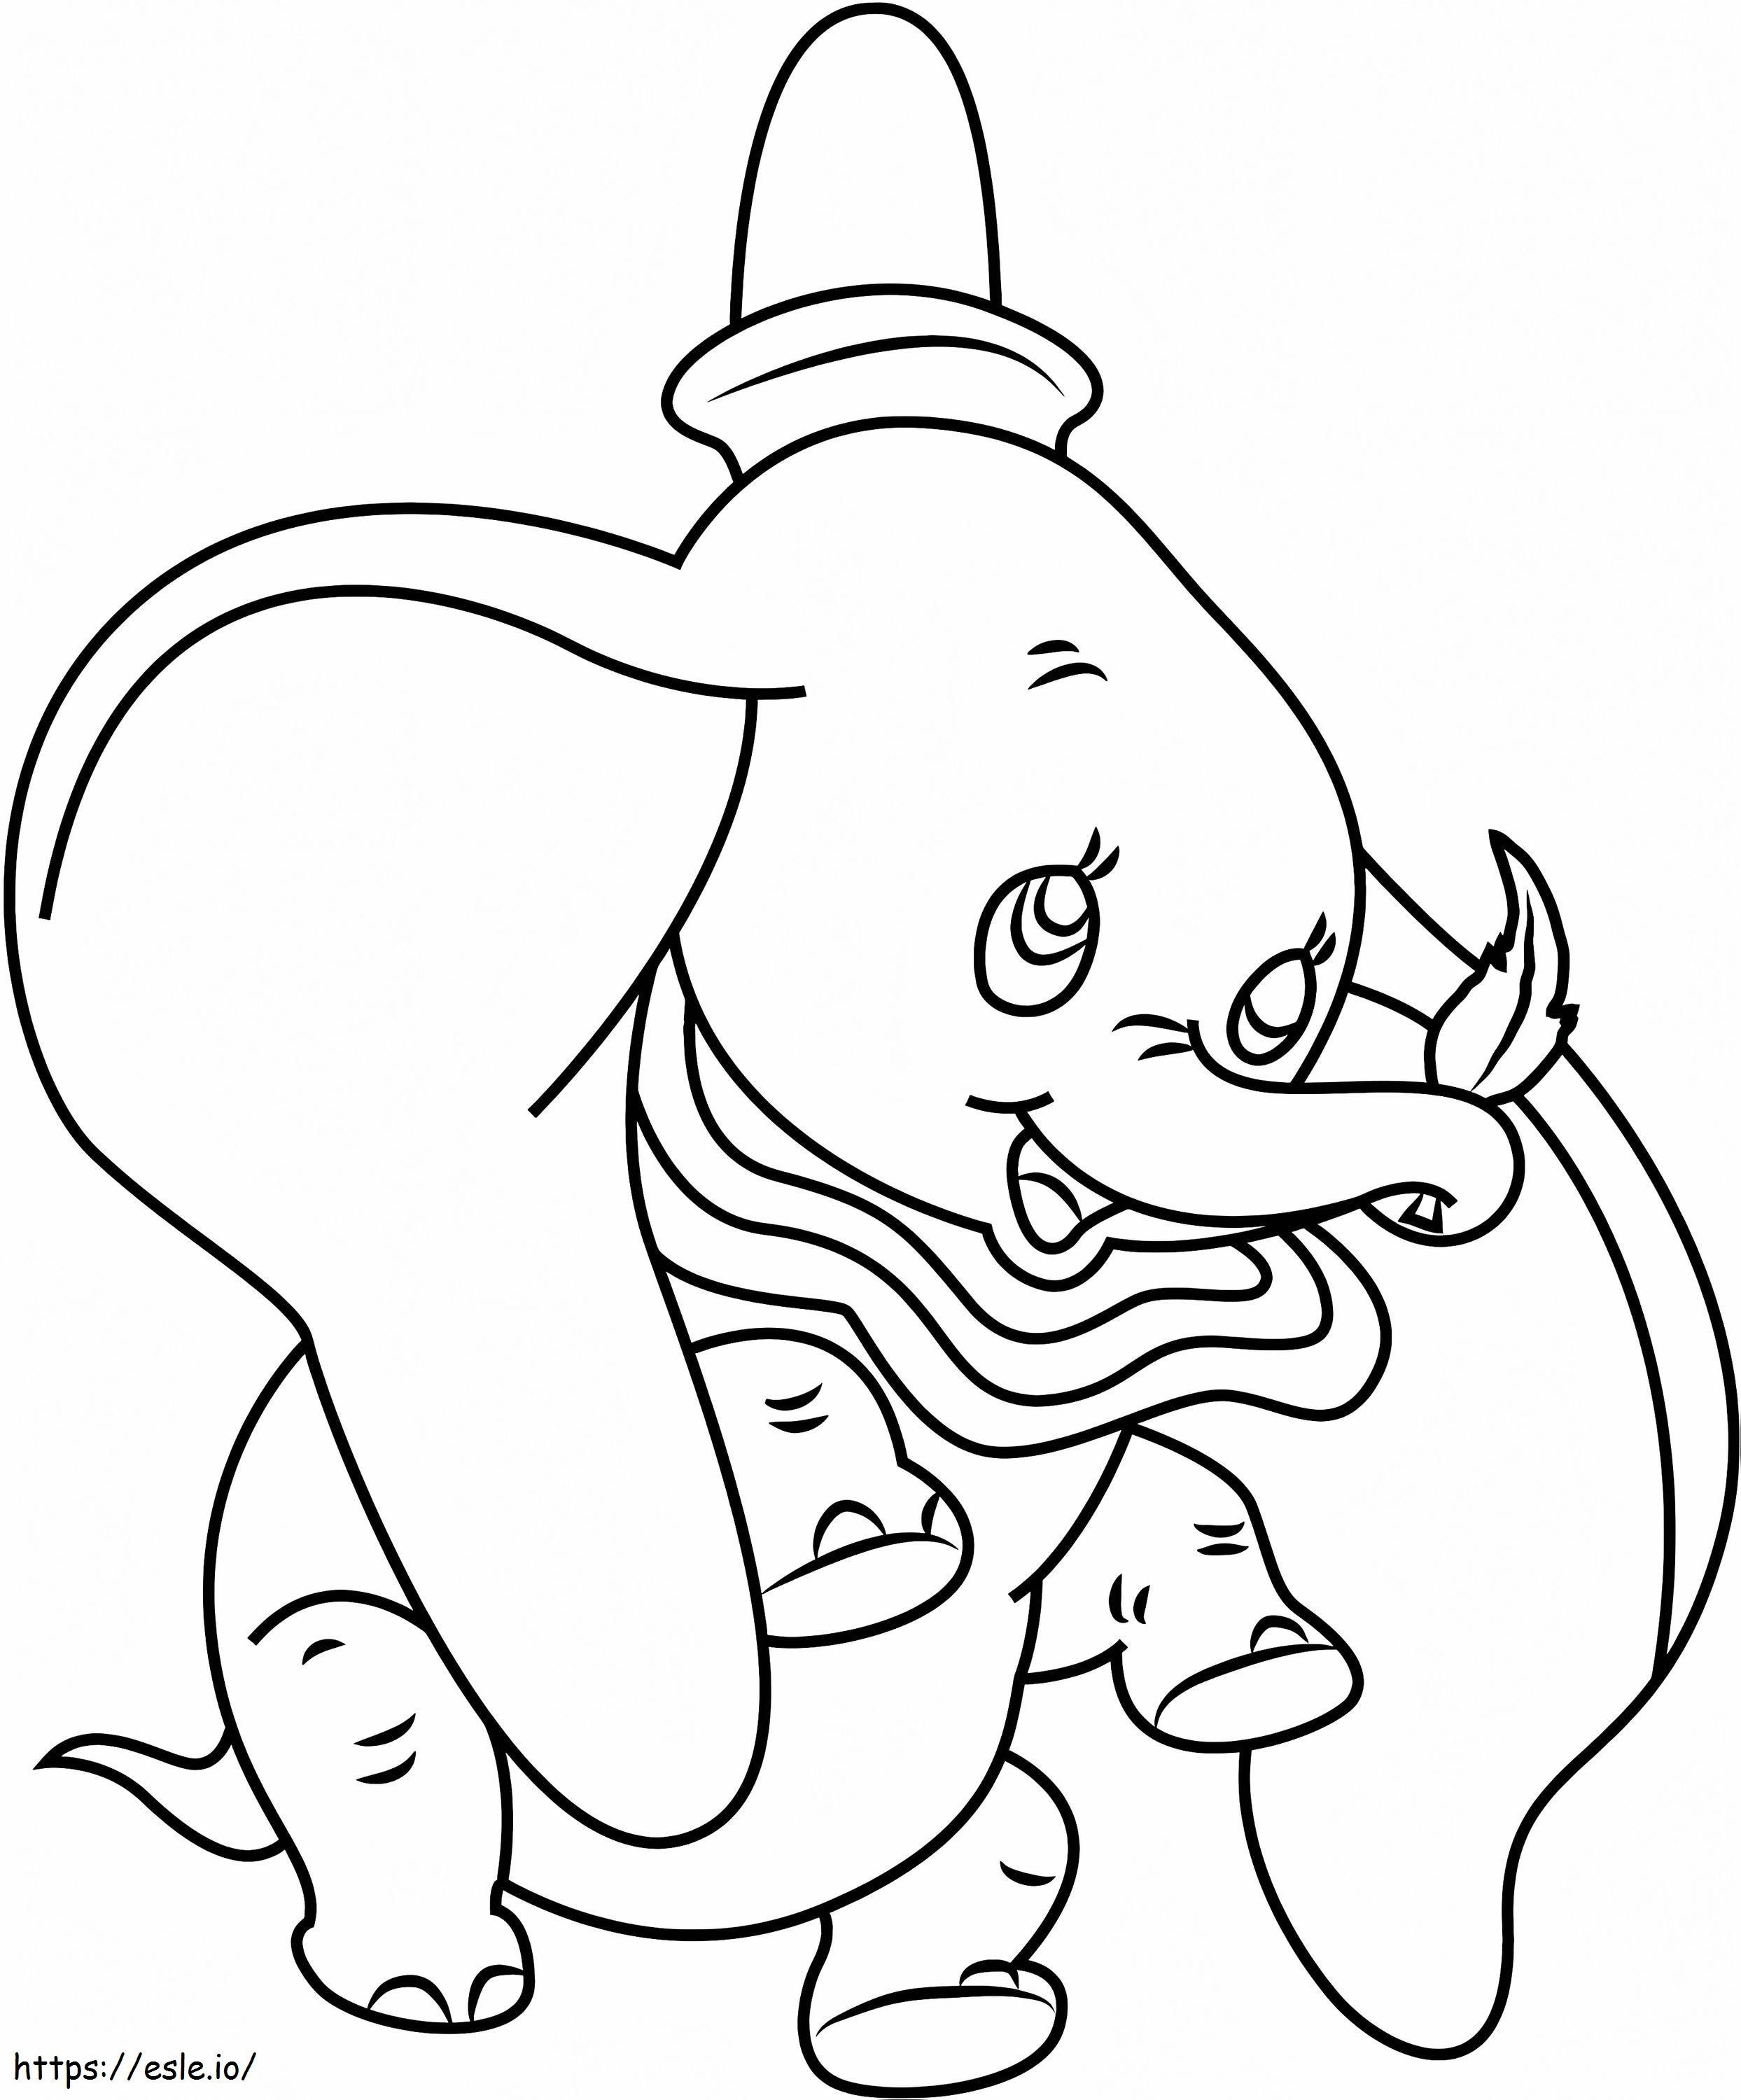 1530929502 Dumbo Holding Leaf A4 coloring page